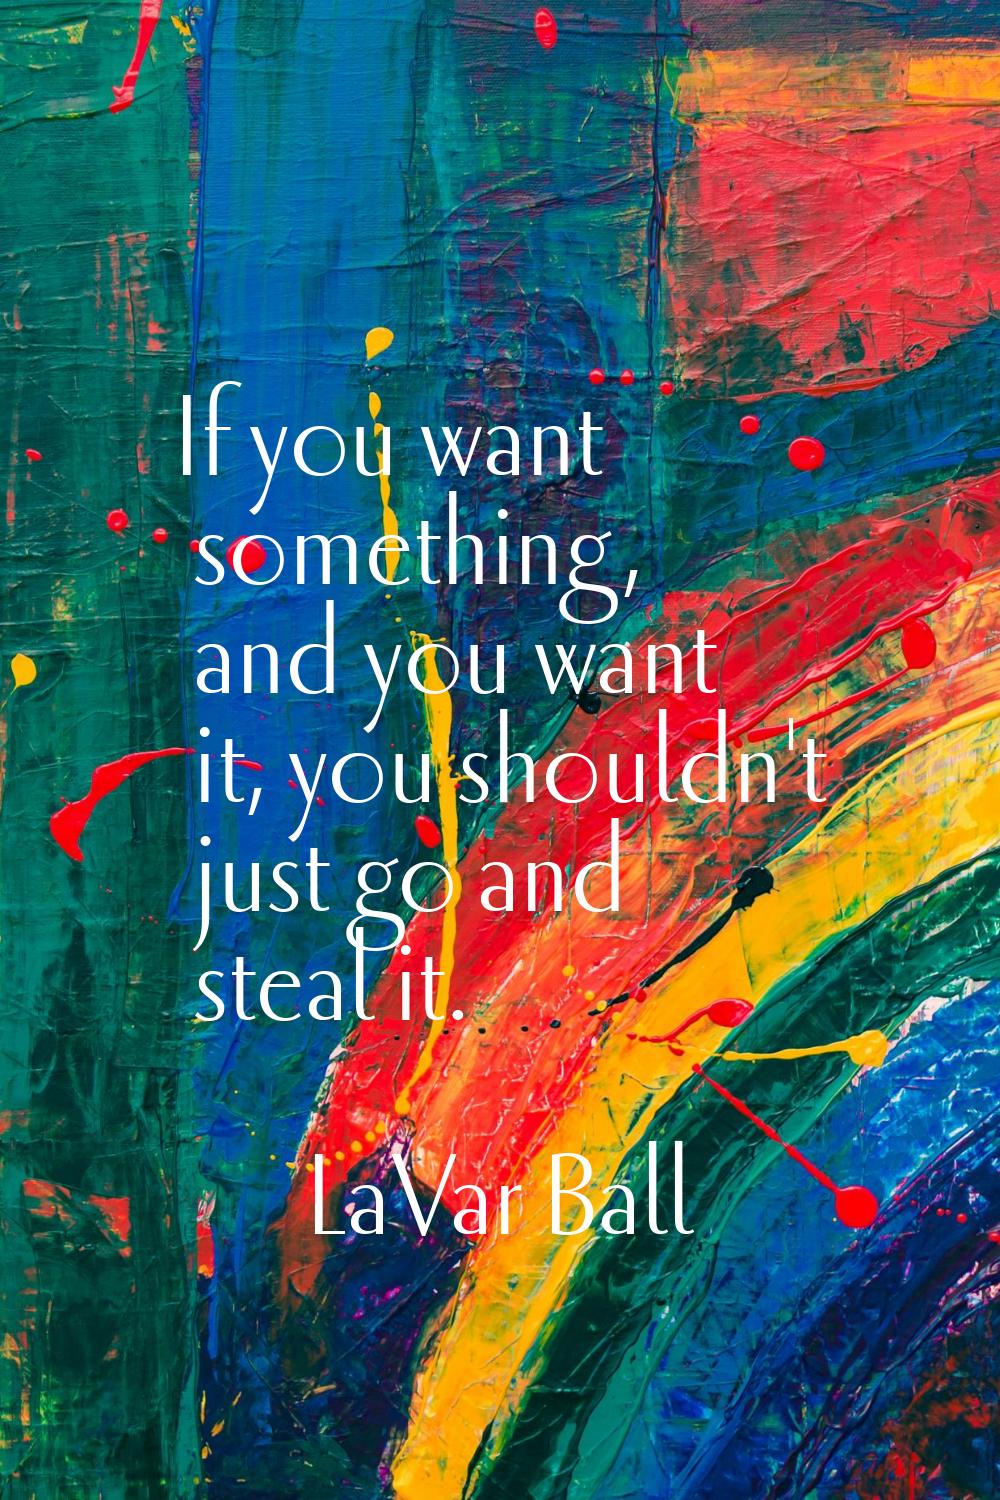 If you want something, and you want it, you shouldn't just go and steal it.